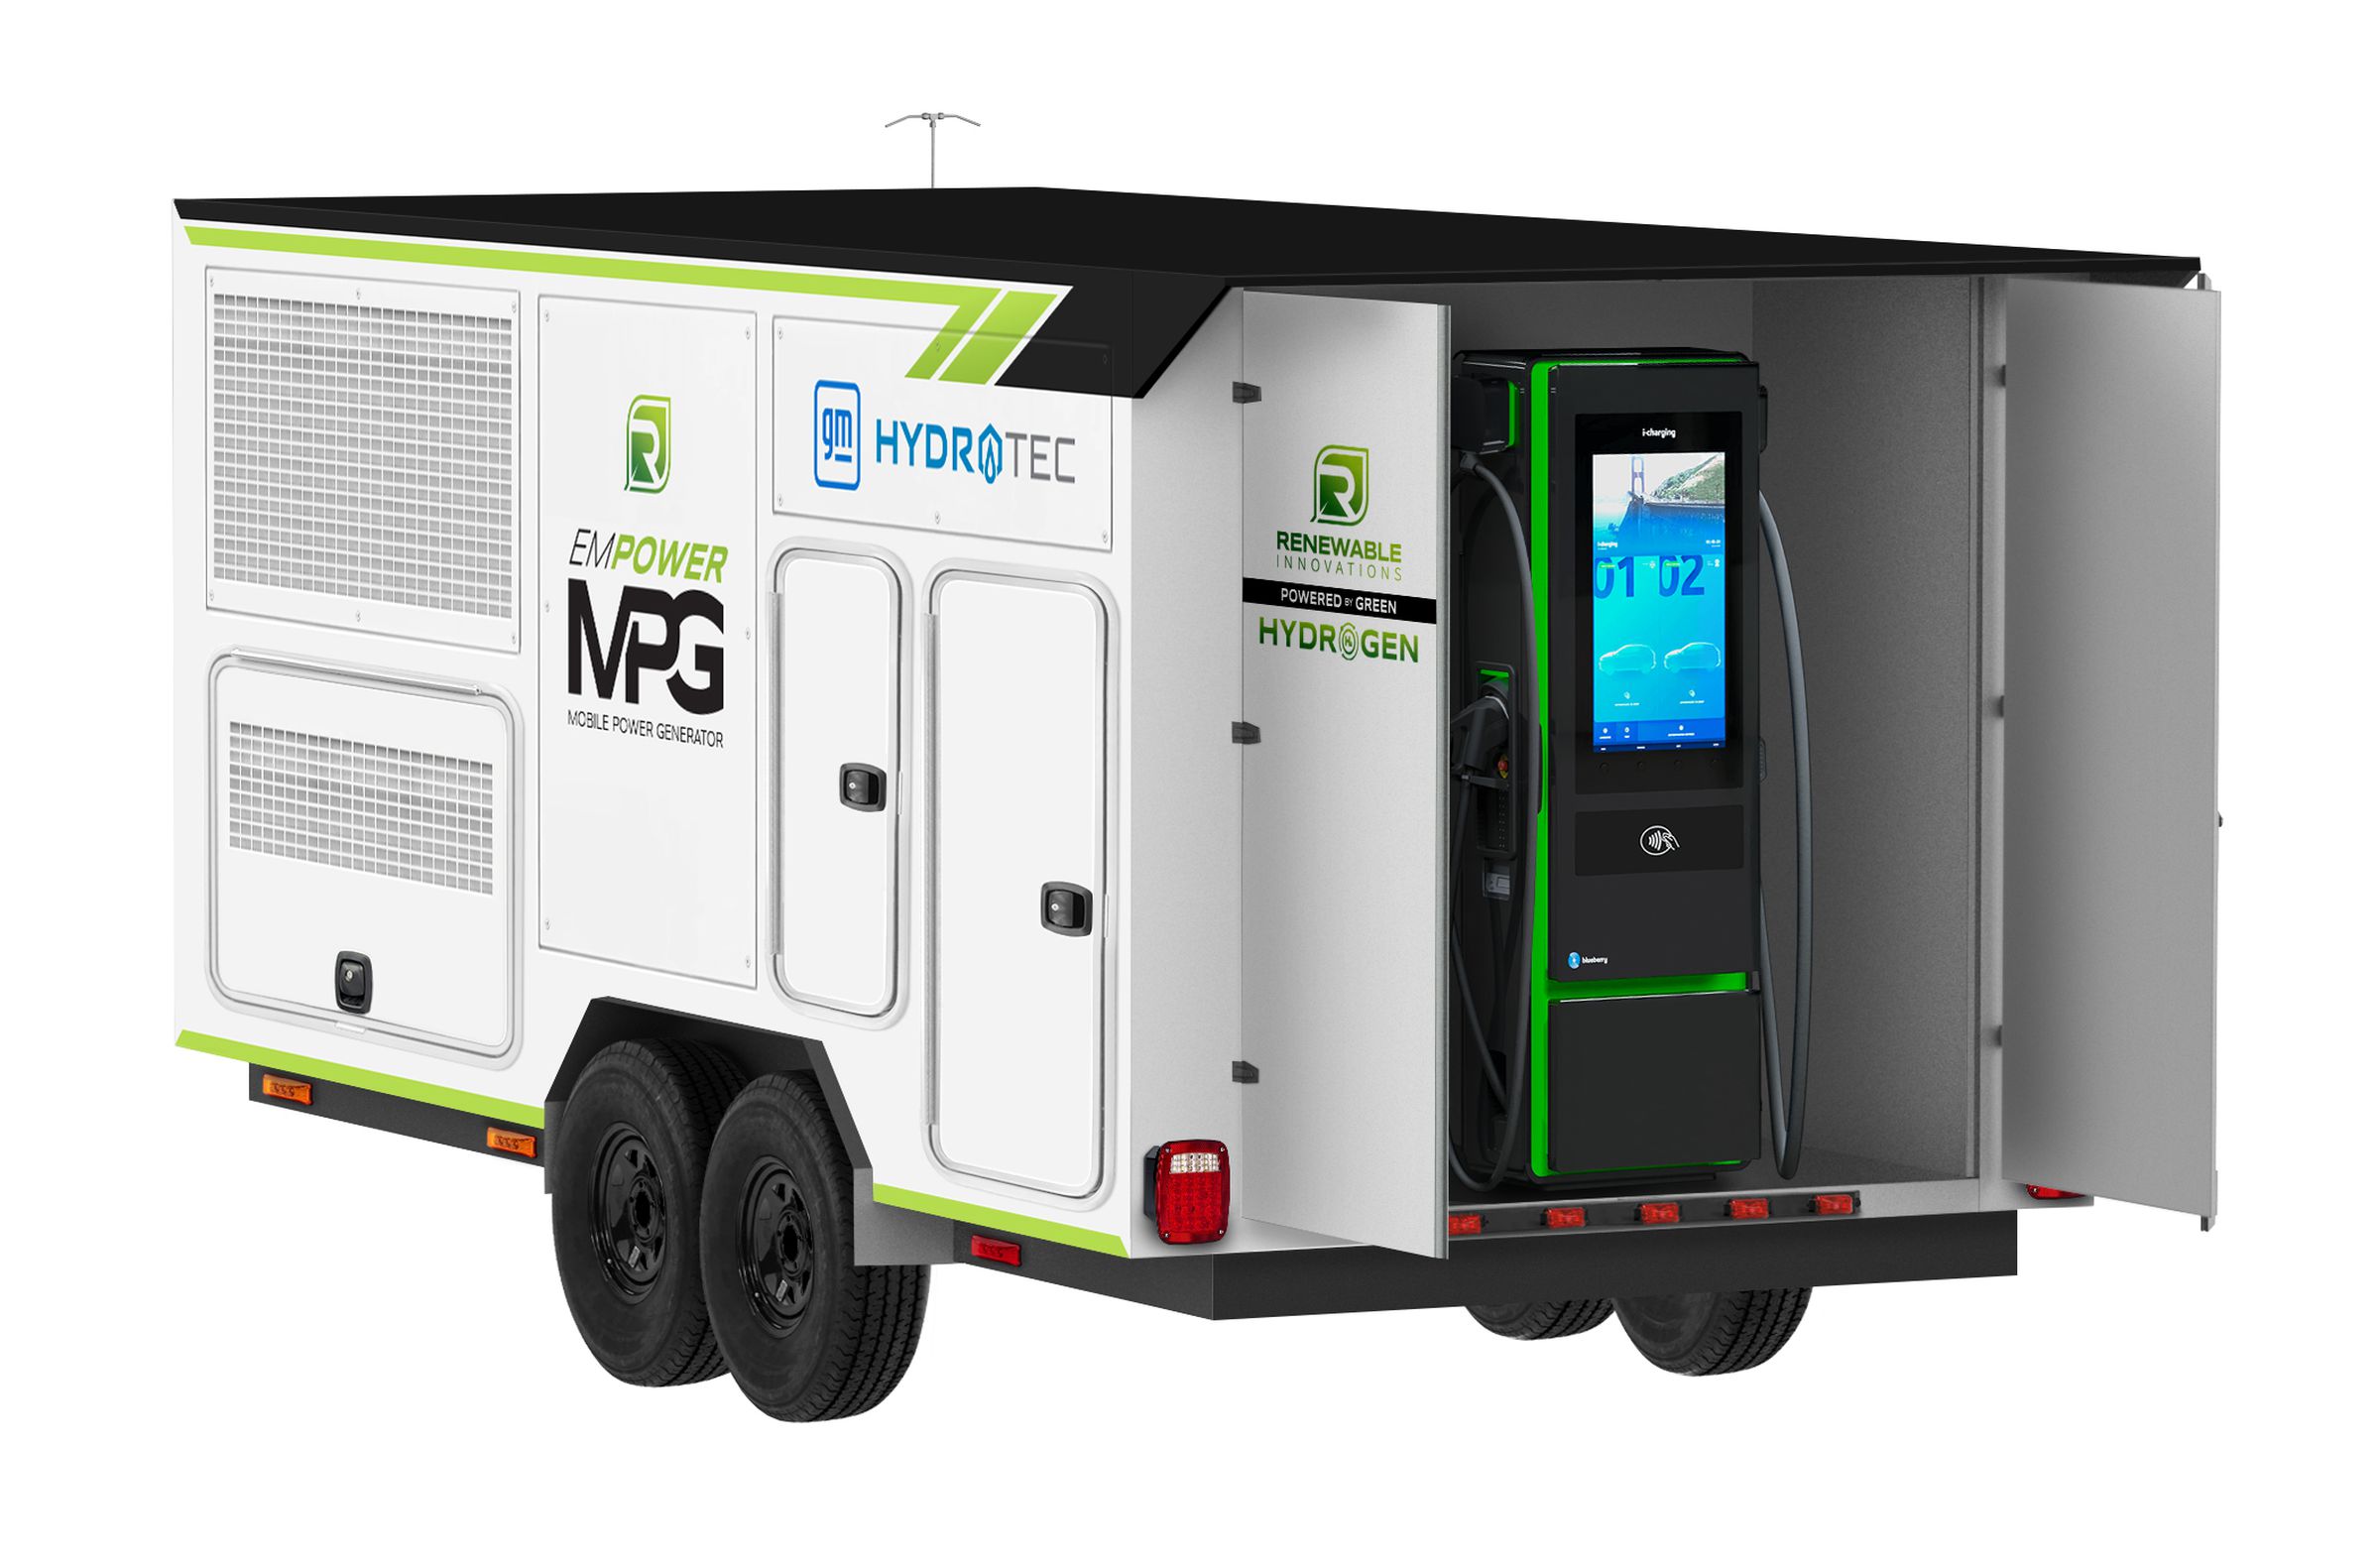 GM’s Mobile Power Generator can fast-charge EVs without having to expand the grid or install permanent charge points in places where there is only a temporary need for power